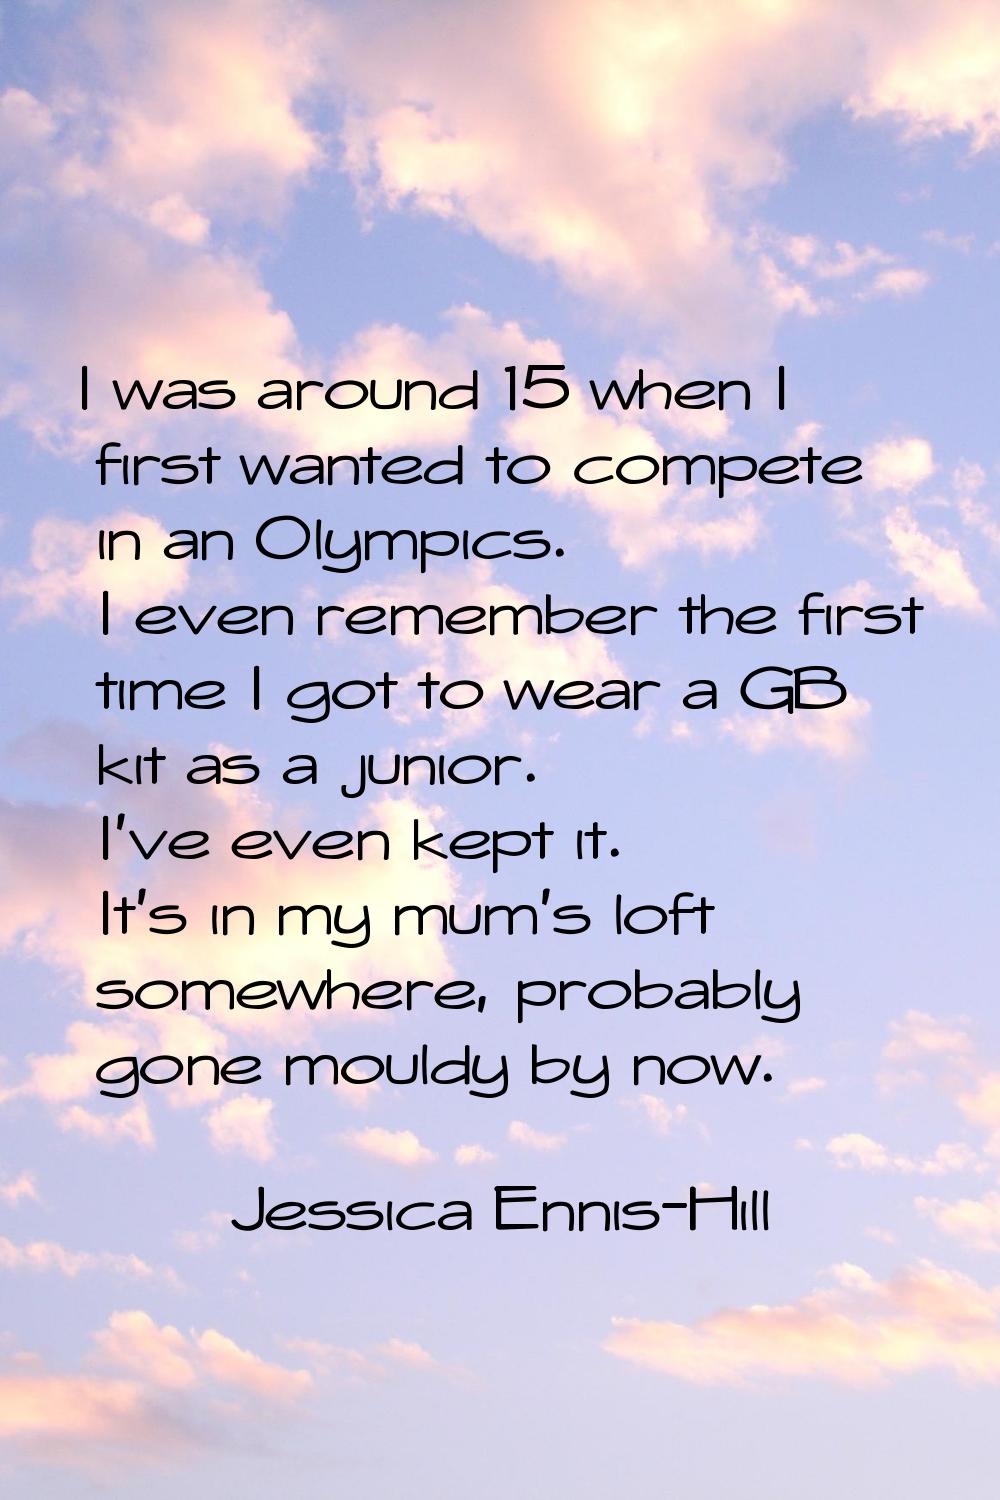 I was around 15 when I first wanted to compete in an Olympics. I even remember the first time I got